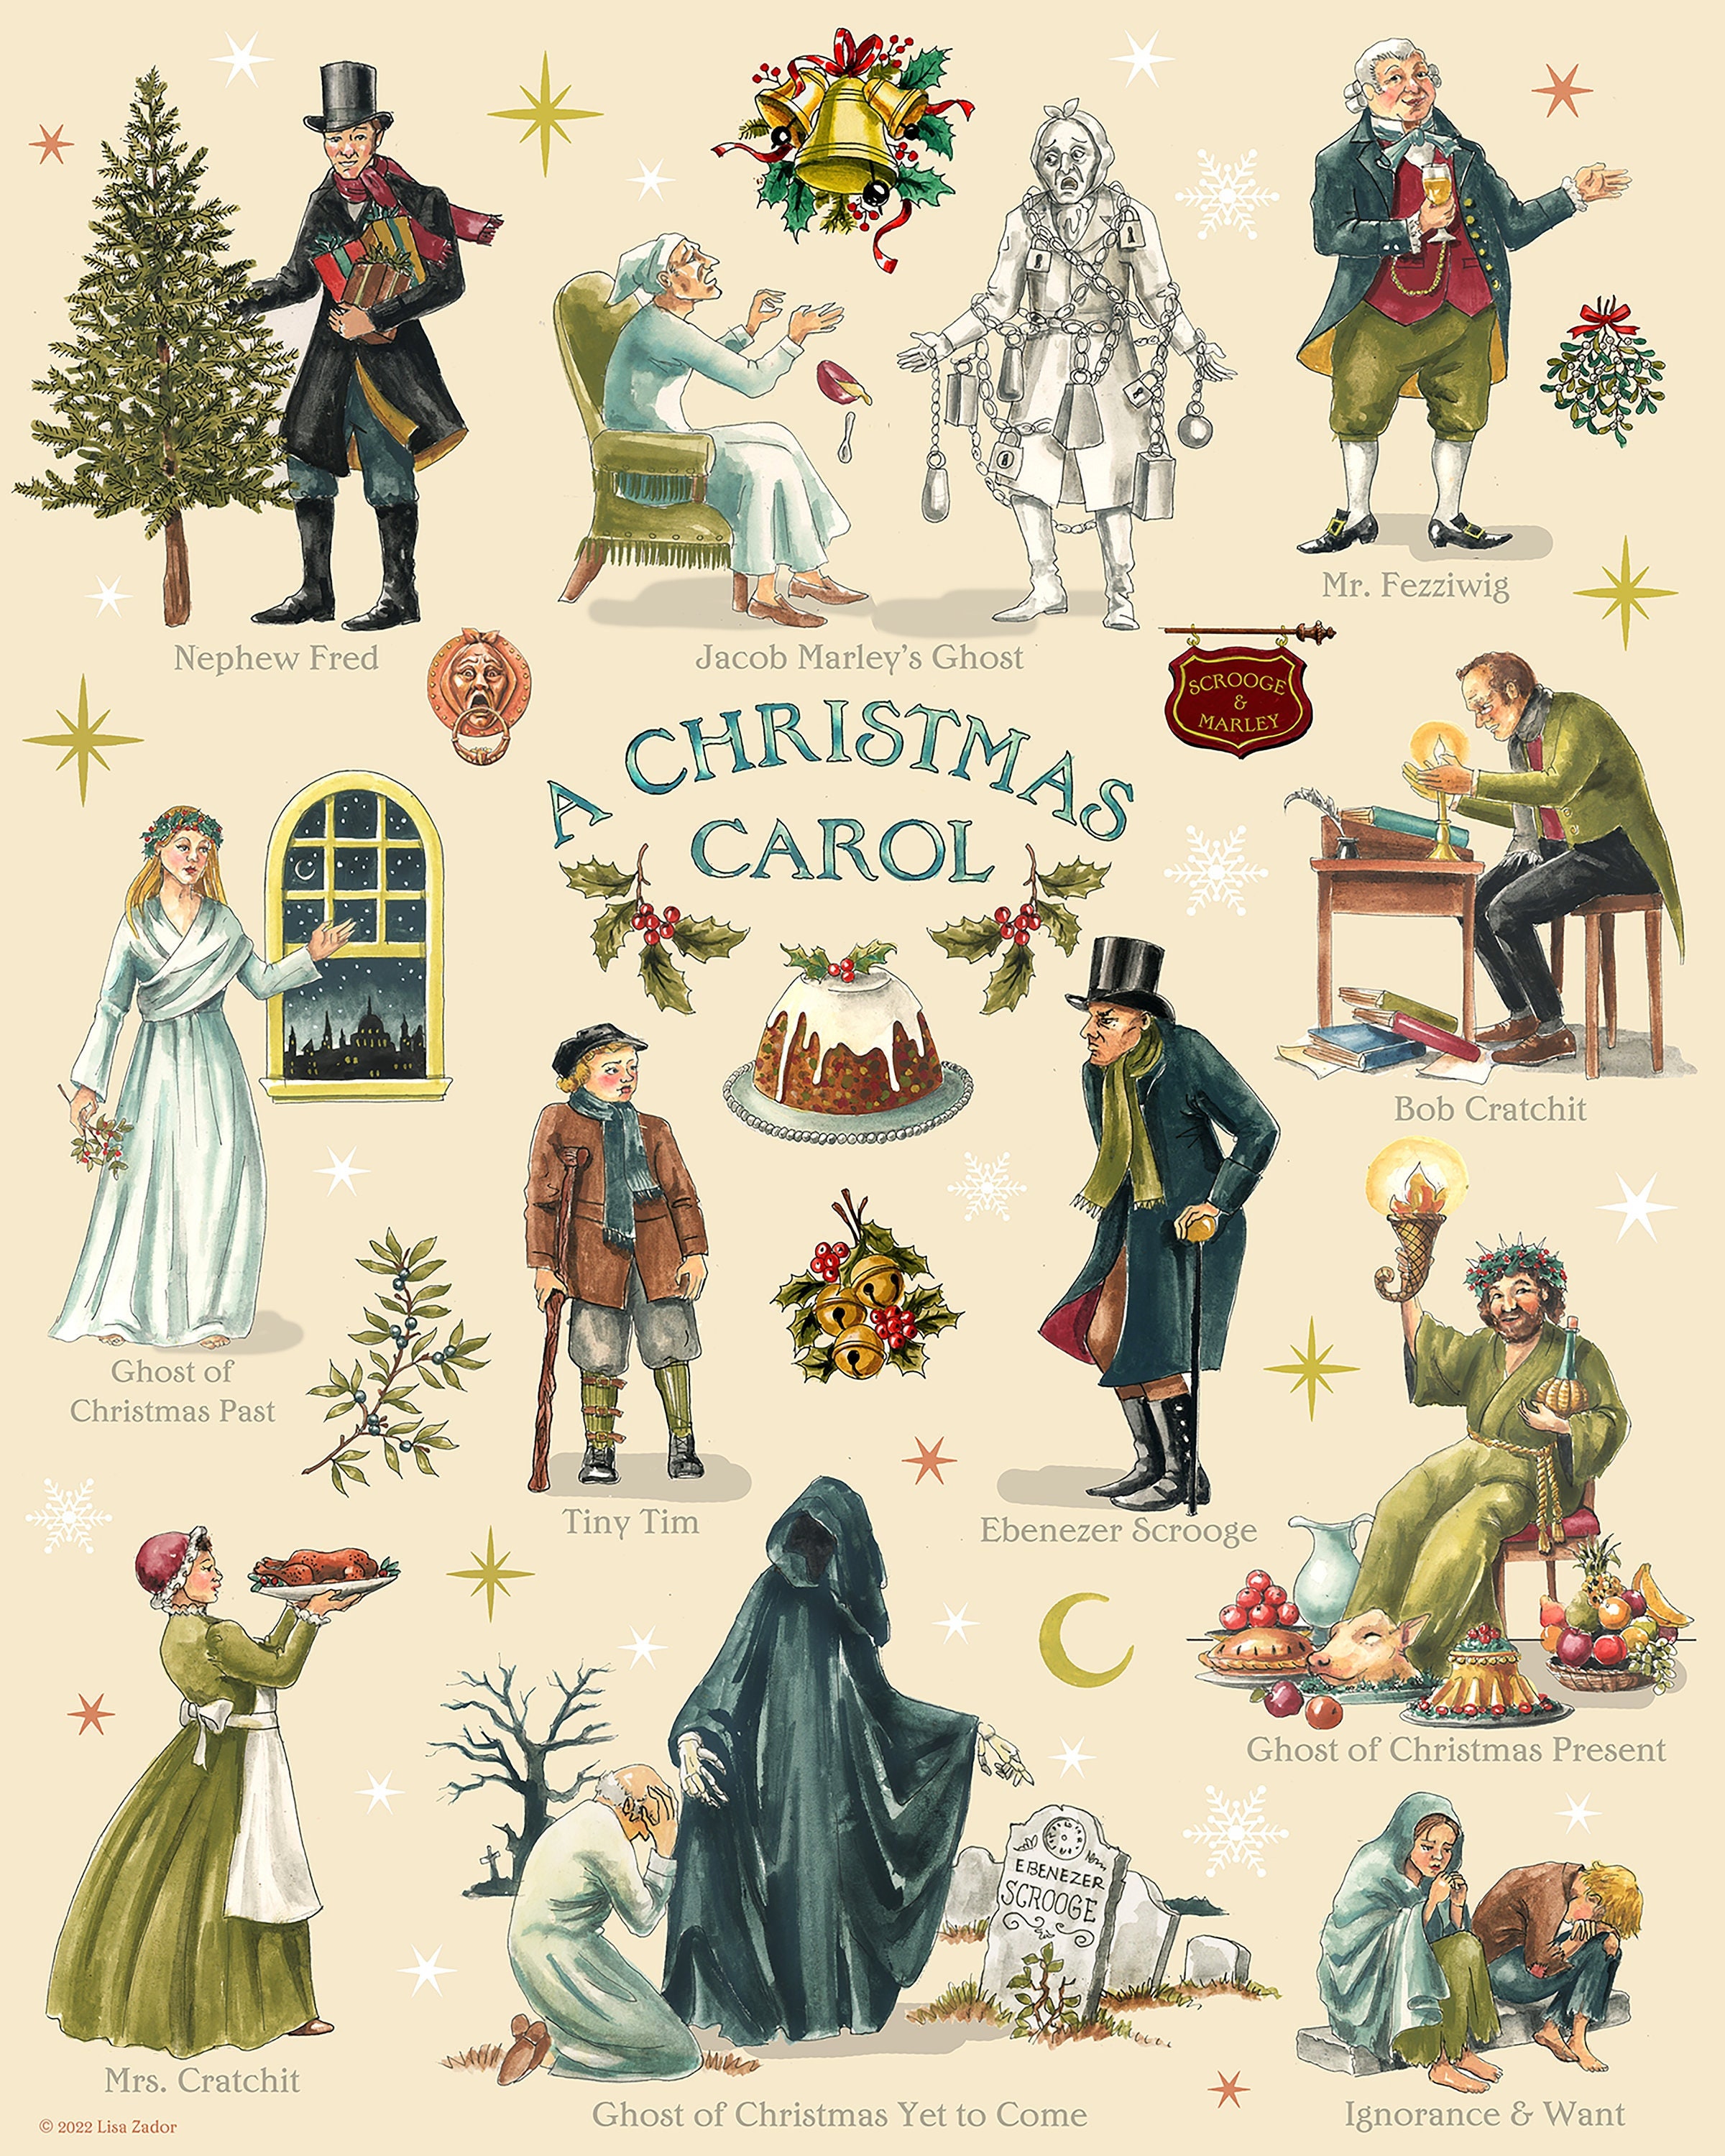 Un Canto di Natale, Charles Dickens  Scrooge a christmas carol, Dickens  christmas carol, Dutch artists